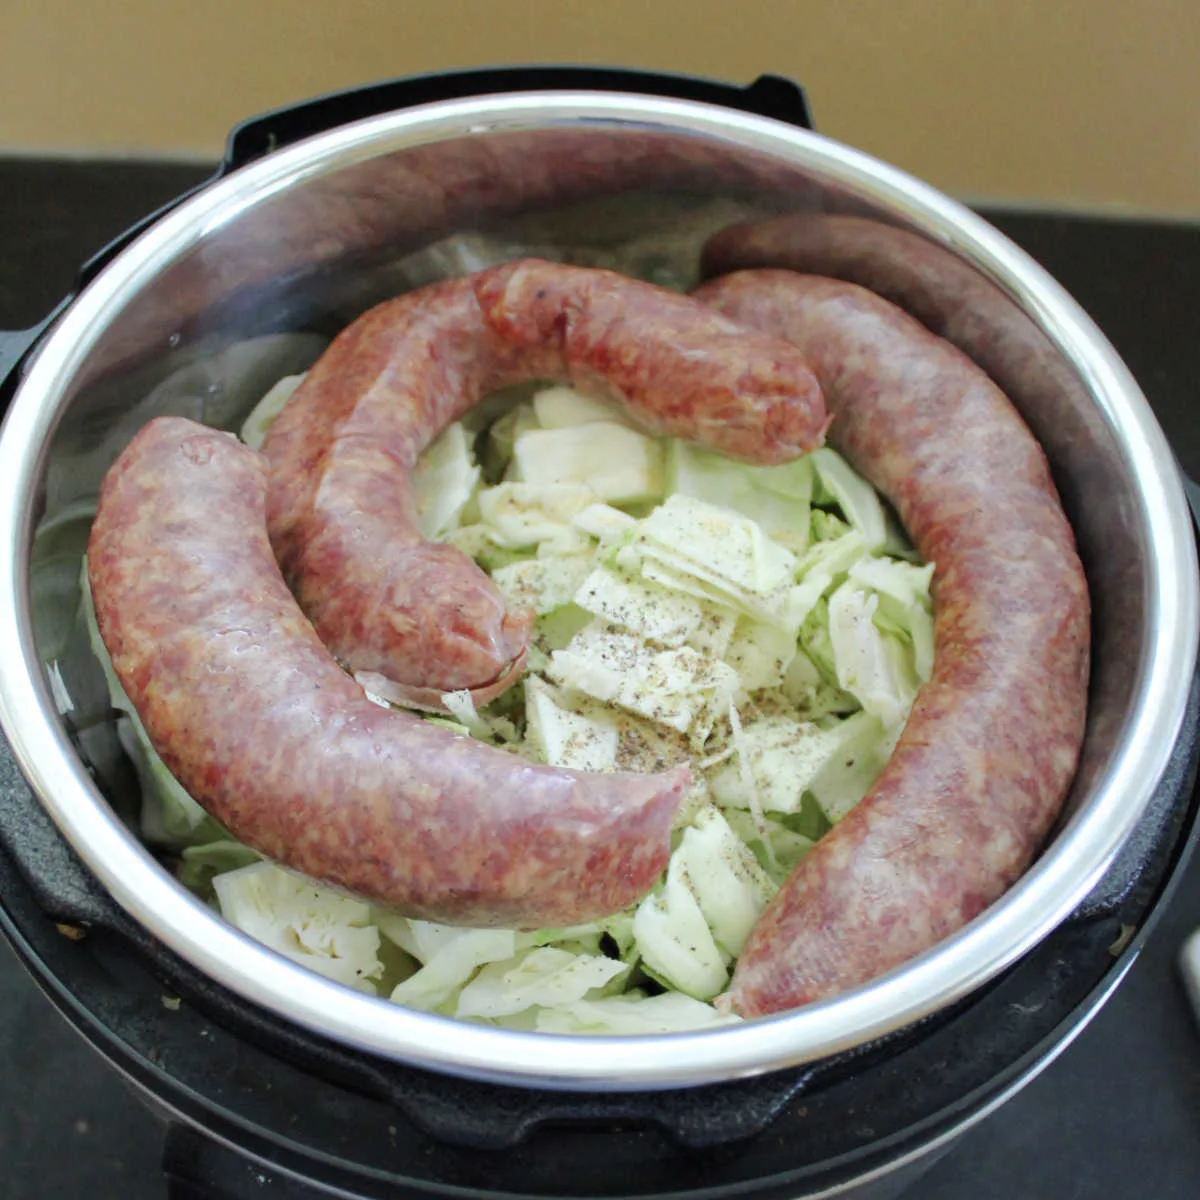 cabbage, potatoes and sausage in instant pot ready to cook.